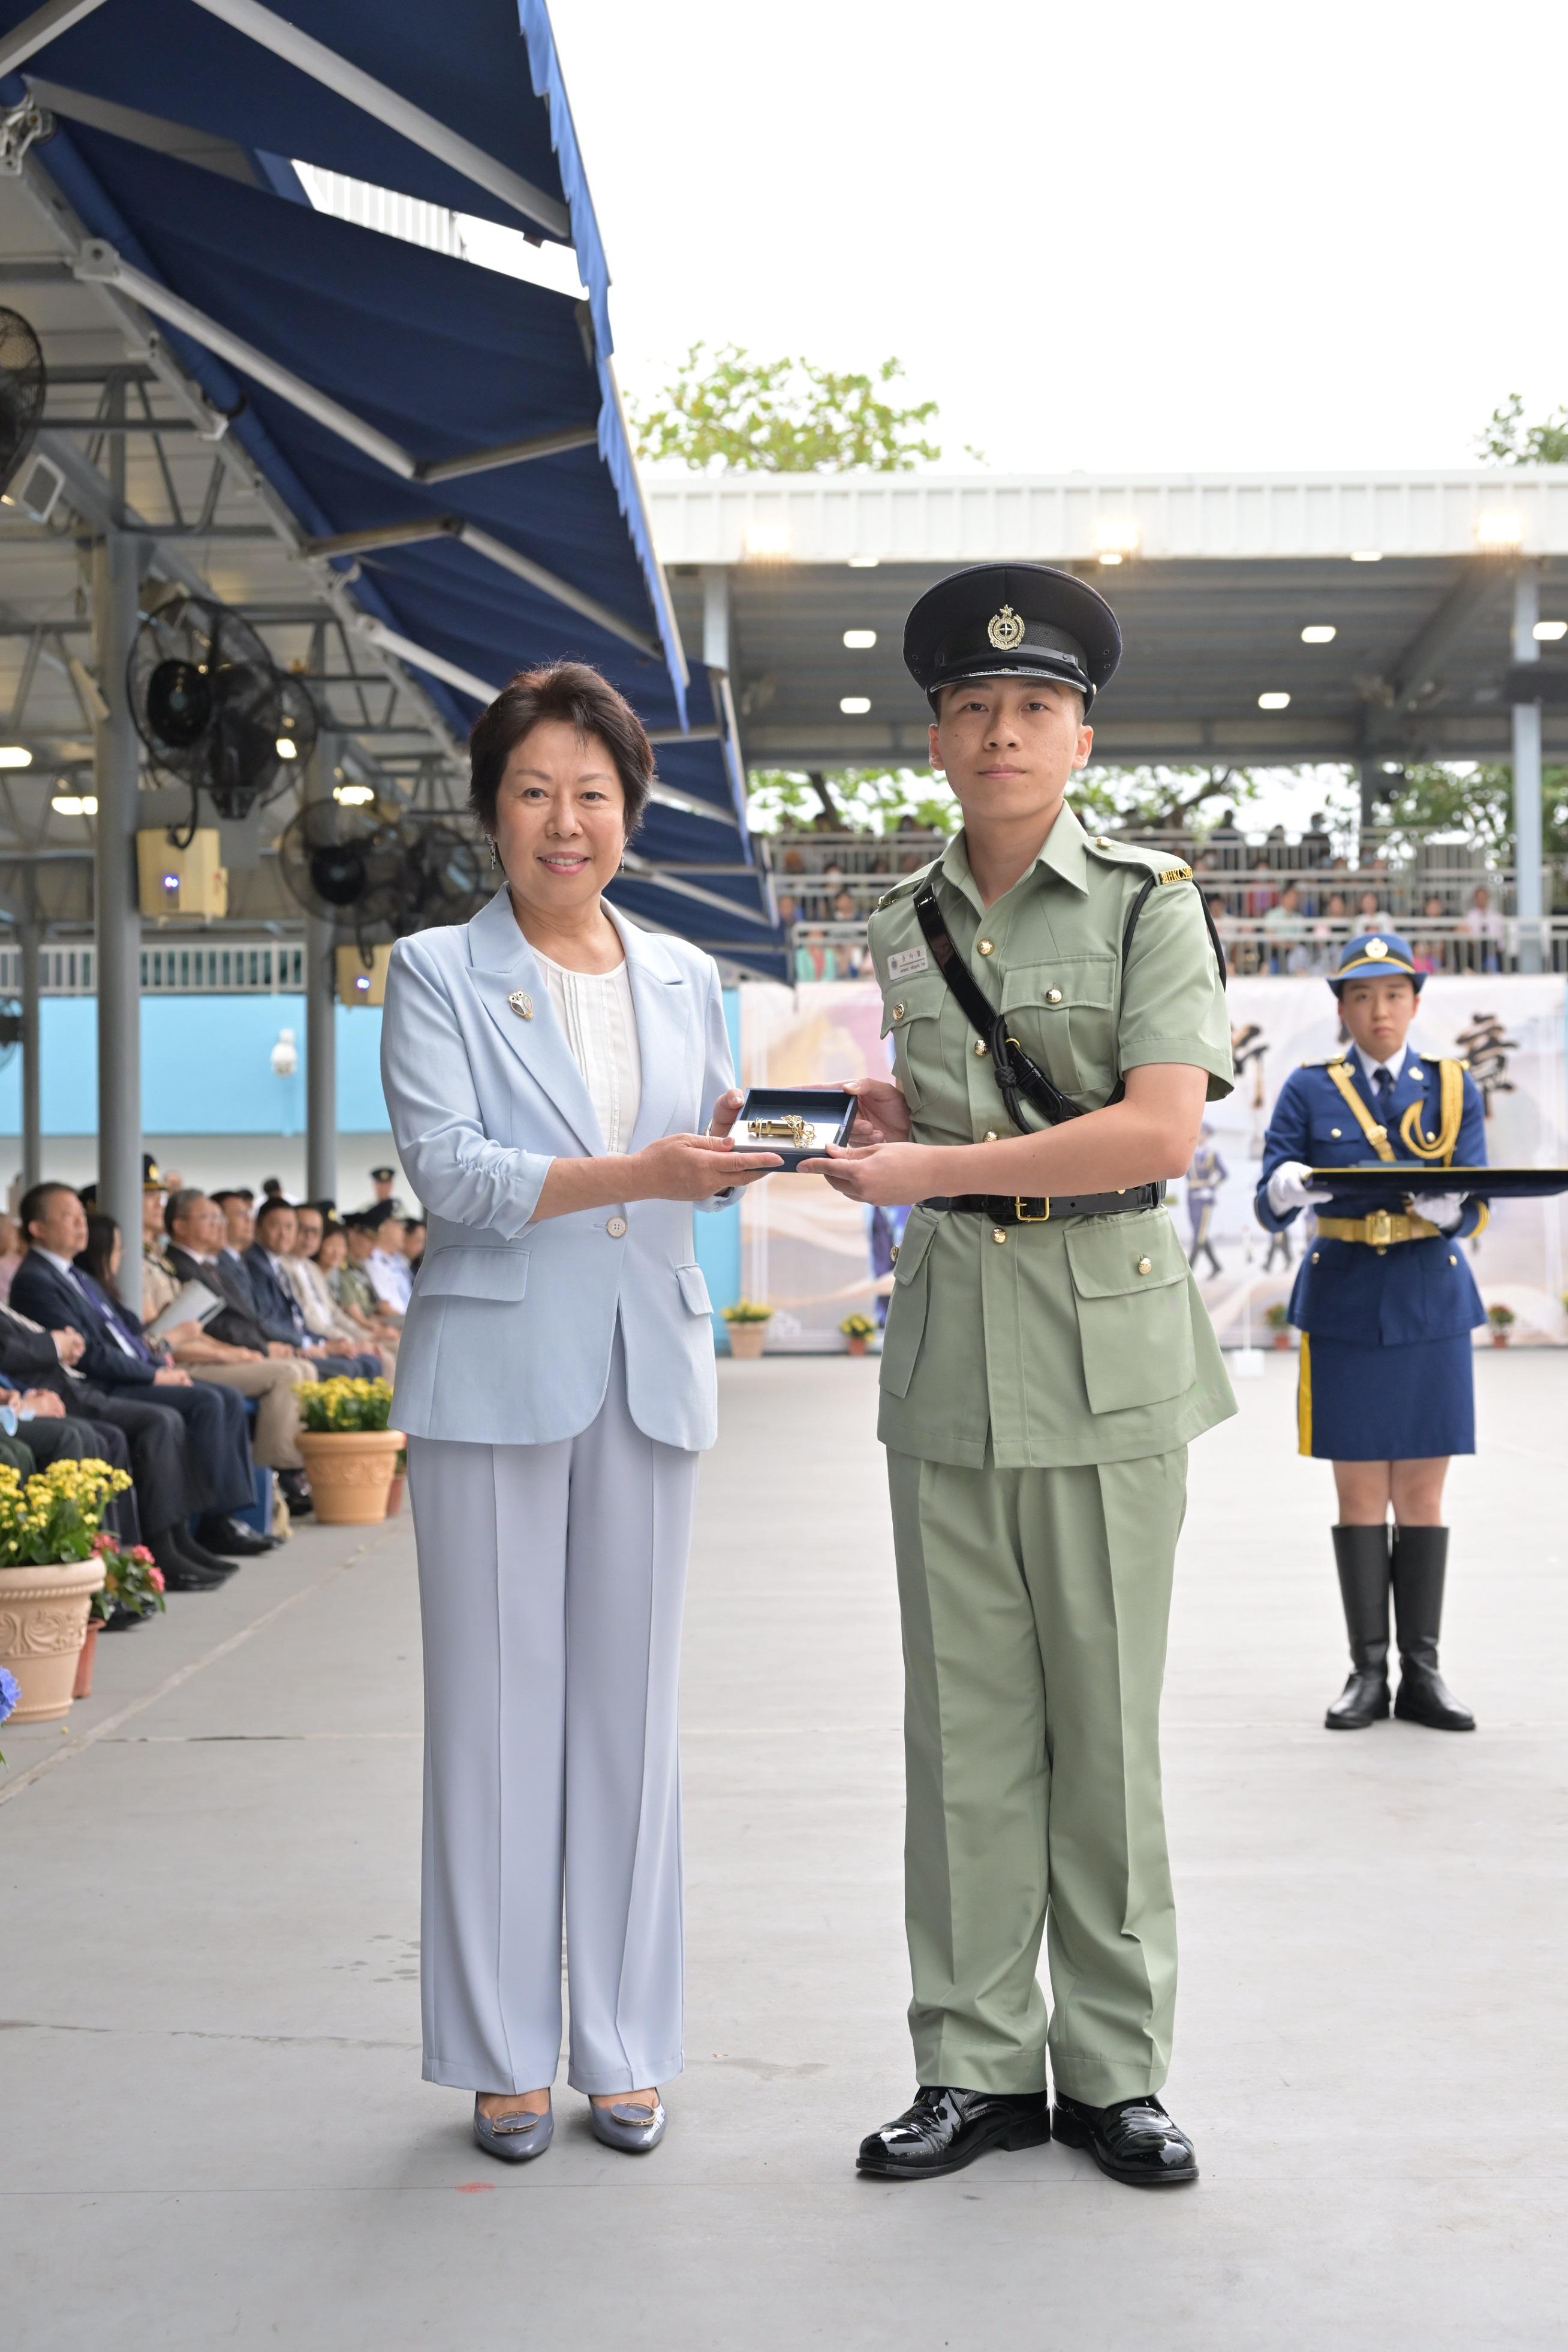 The Correctional Services Department held a passing-out parade at the Hong Kong Correctional Services Academy today (April 21). Photo shows the Chairman of the Committee on Community Support for Rehabilitated Offenders, Ms Tsui Li (left), presenting a Best Recruit Award, the Golden Whistle, to Assistant Officer II Mr Wong Heung-yin.